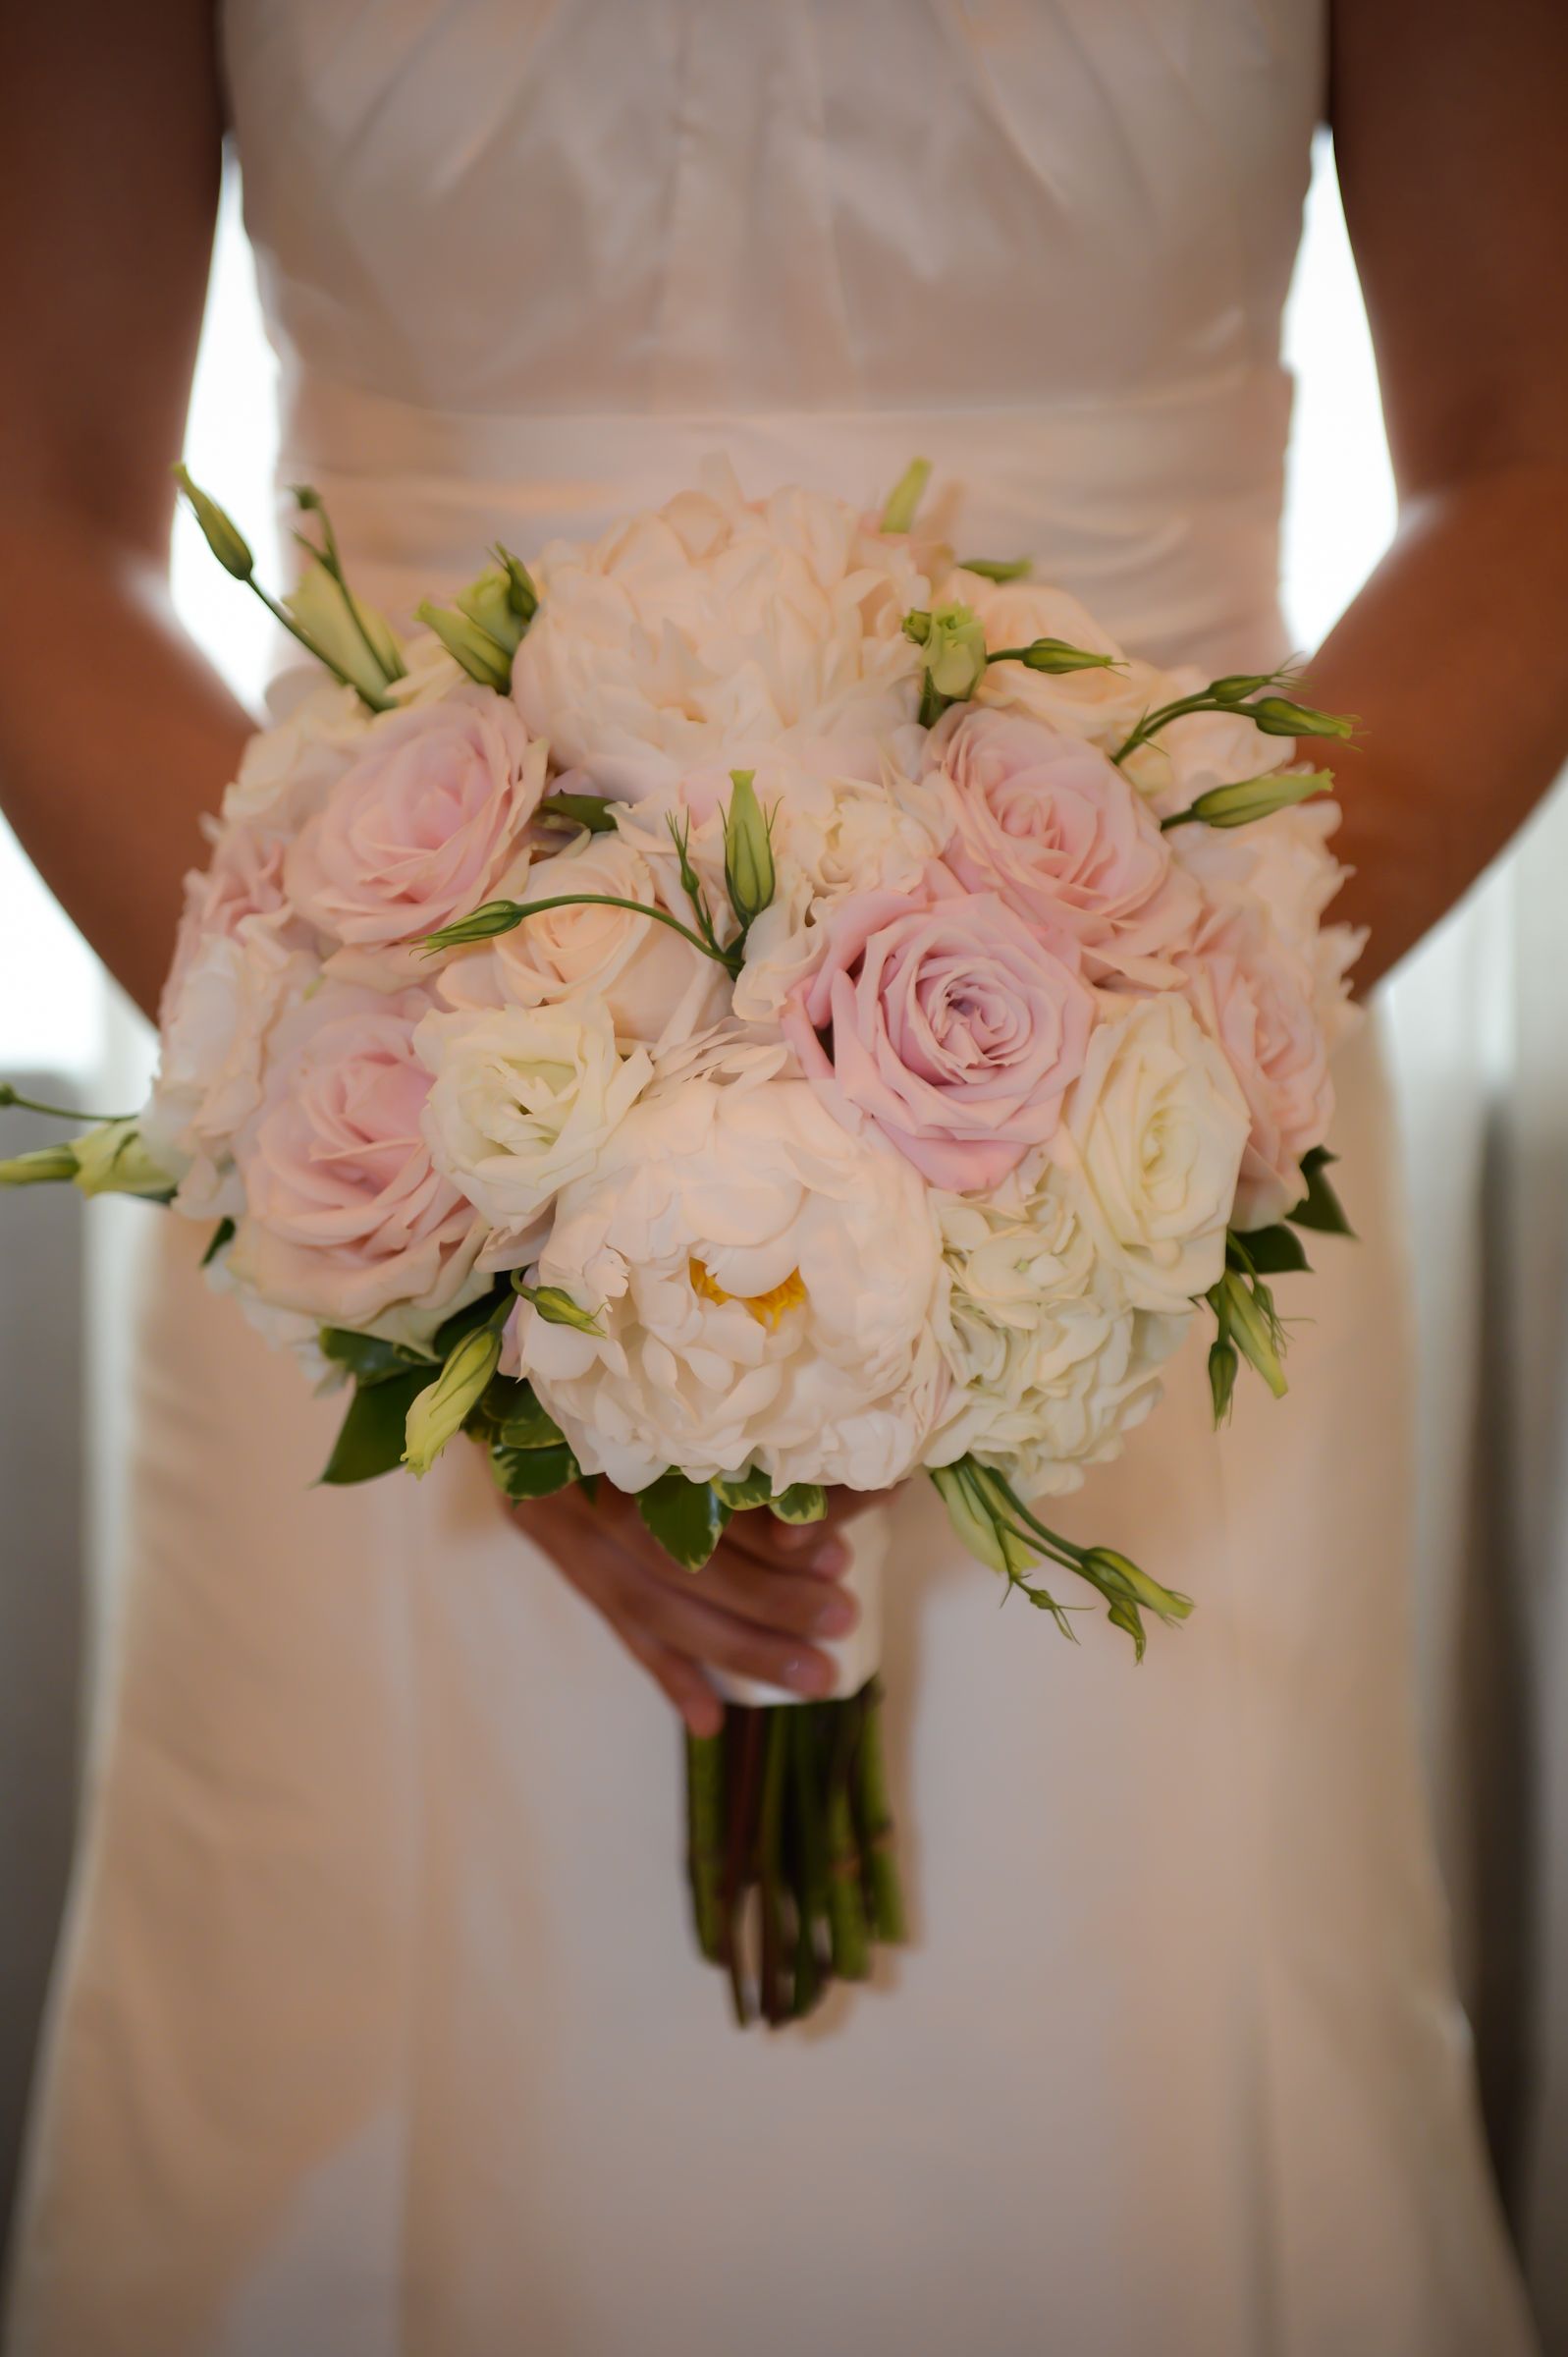  where to buy wedding bouquets